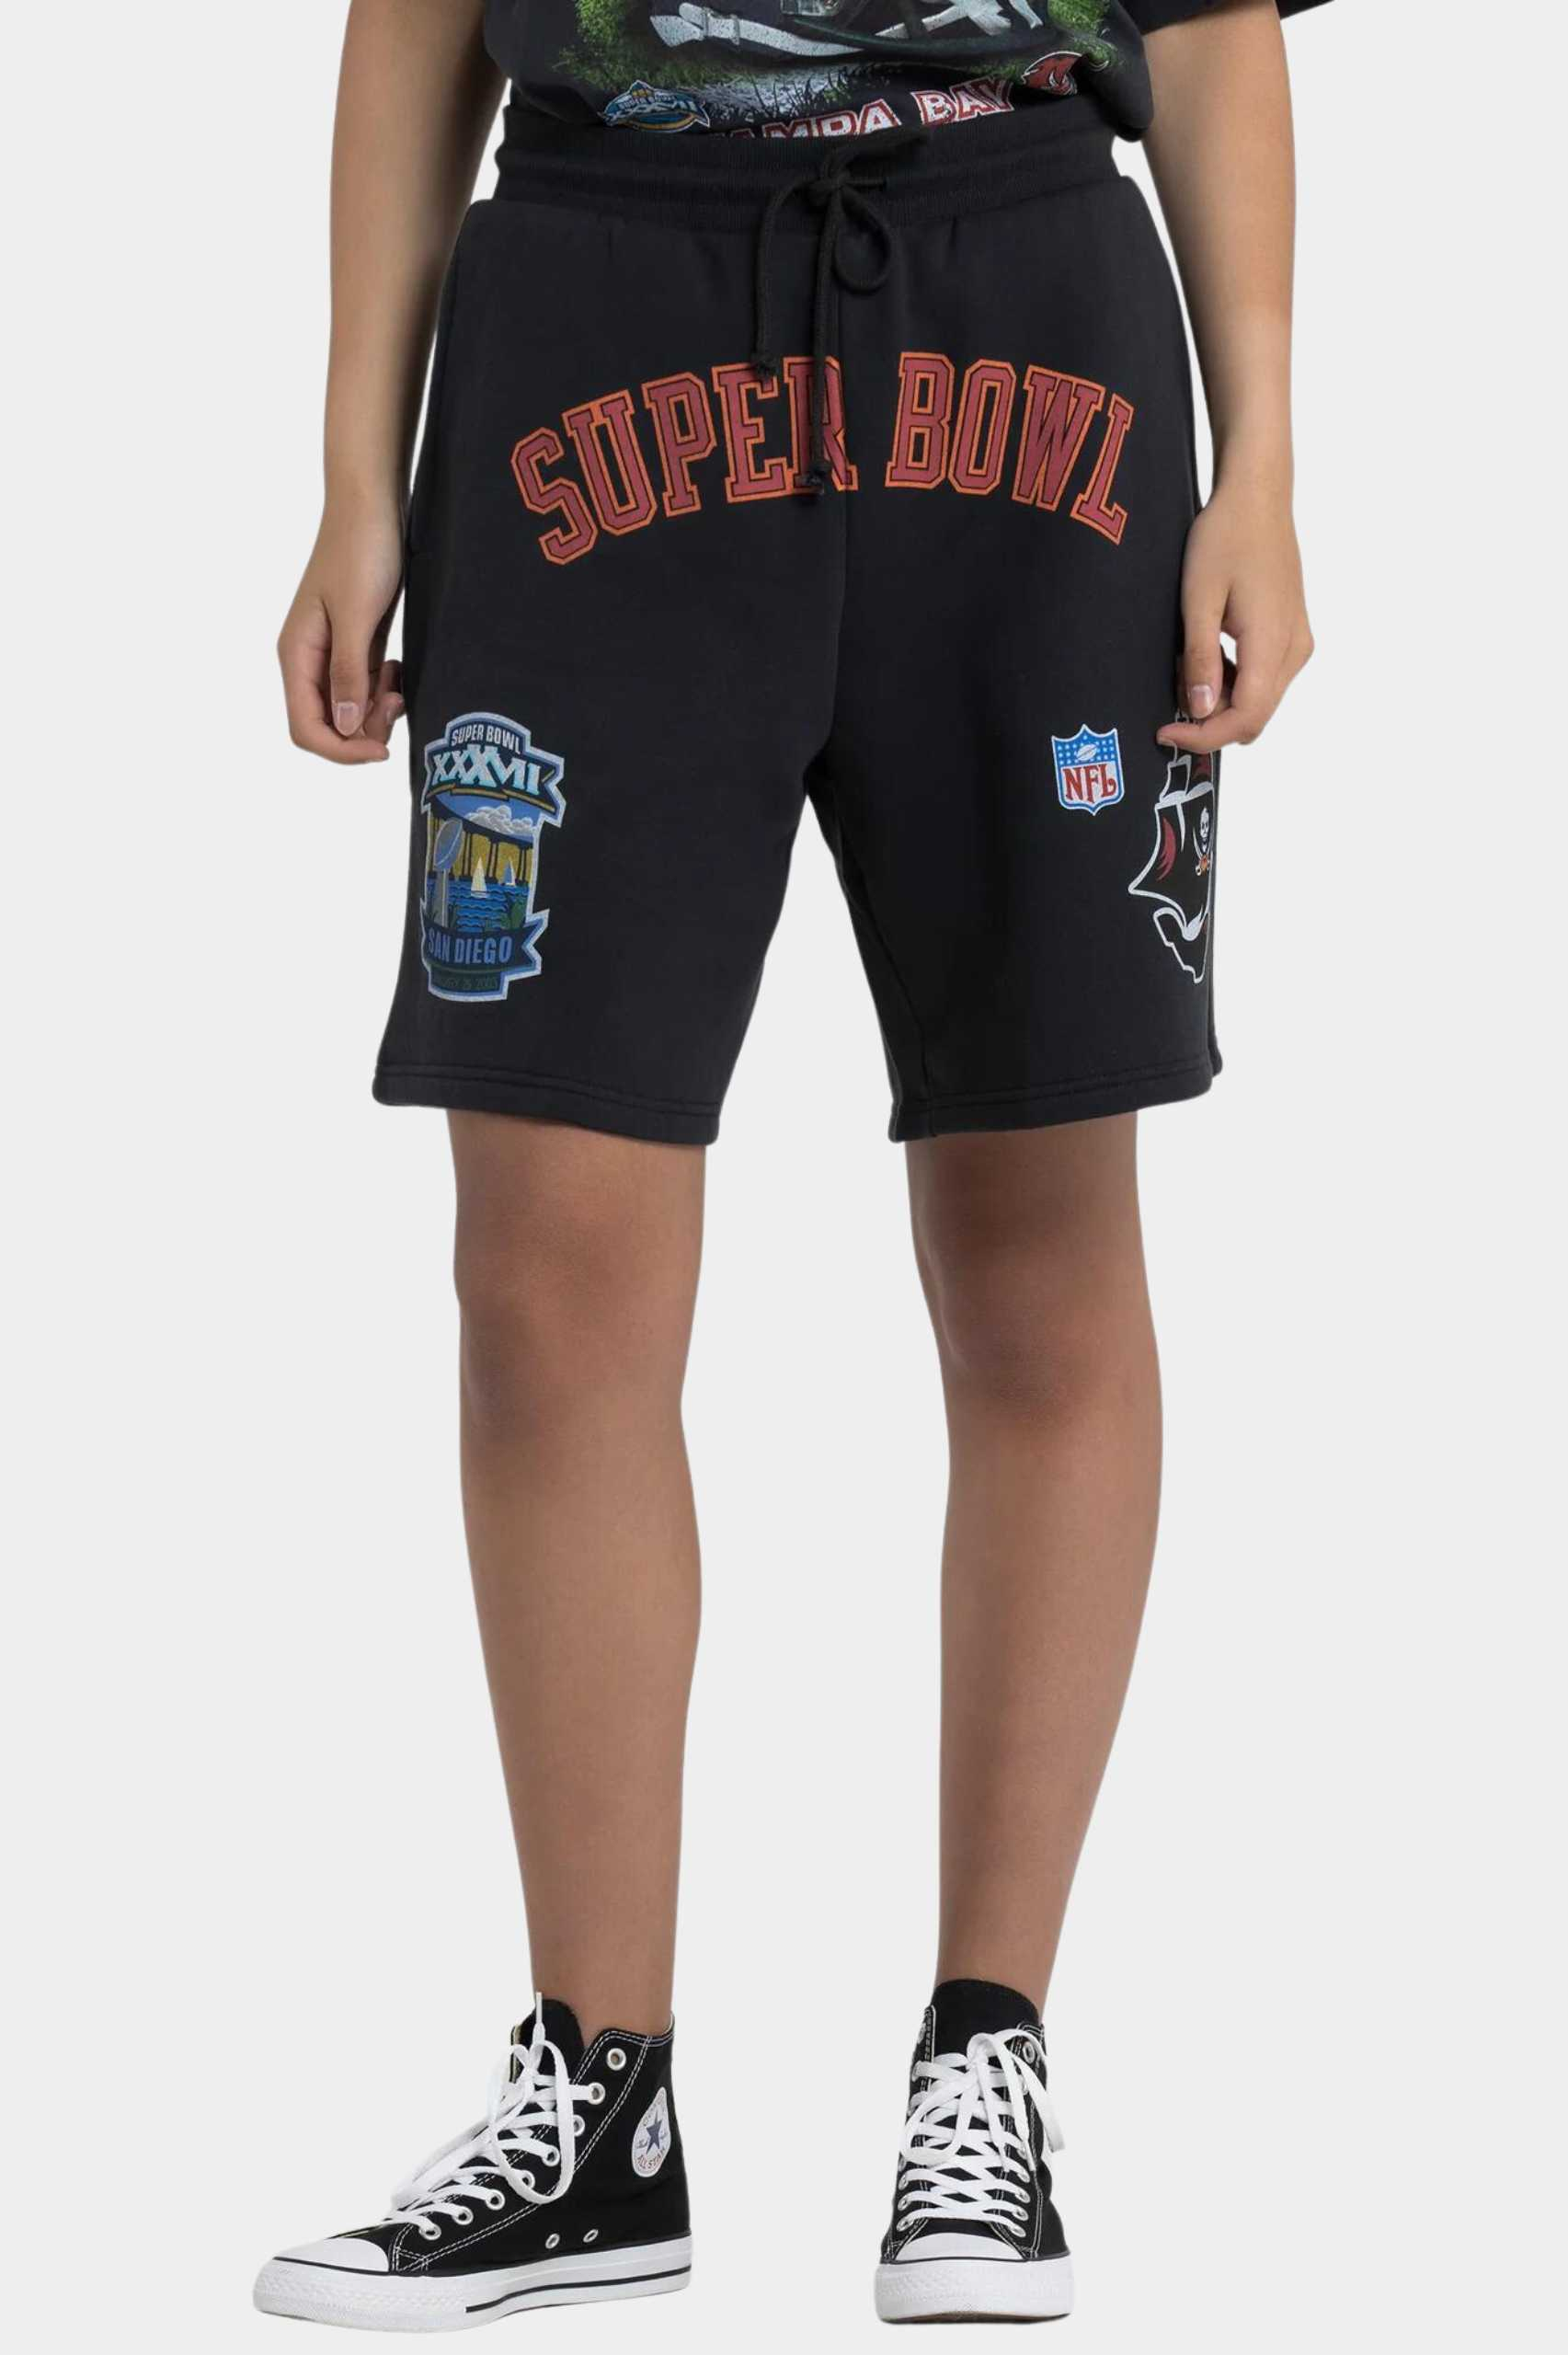 Mitchell & Ness Superbowl Tampa Bay Buccaneers Shorts Unisex